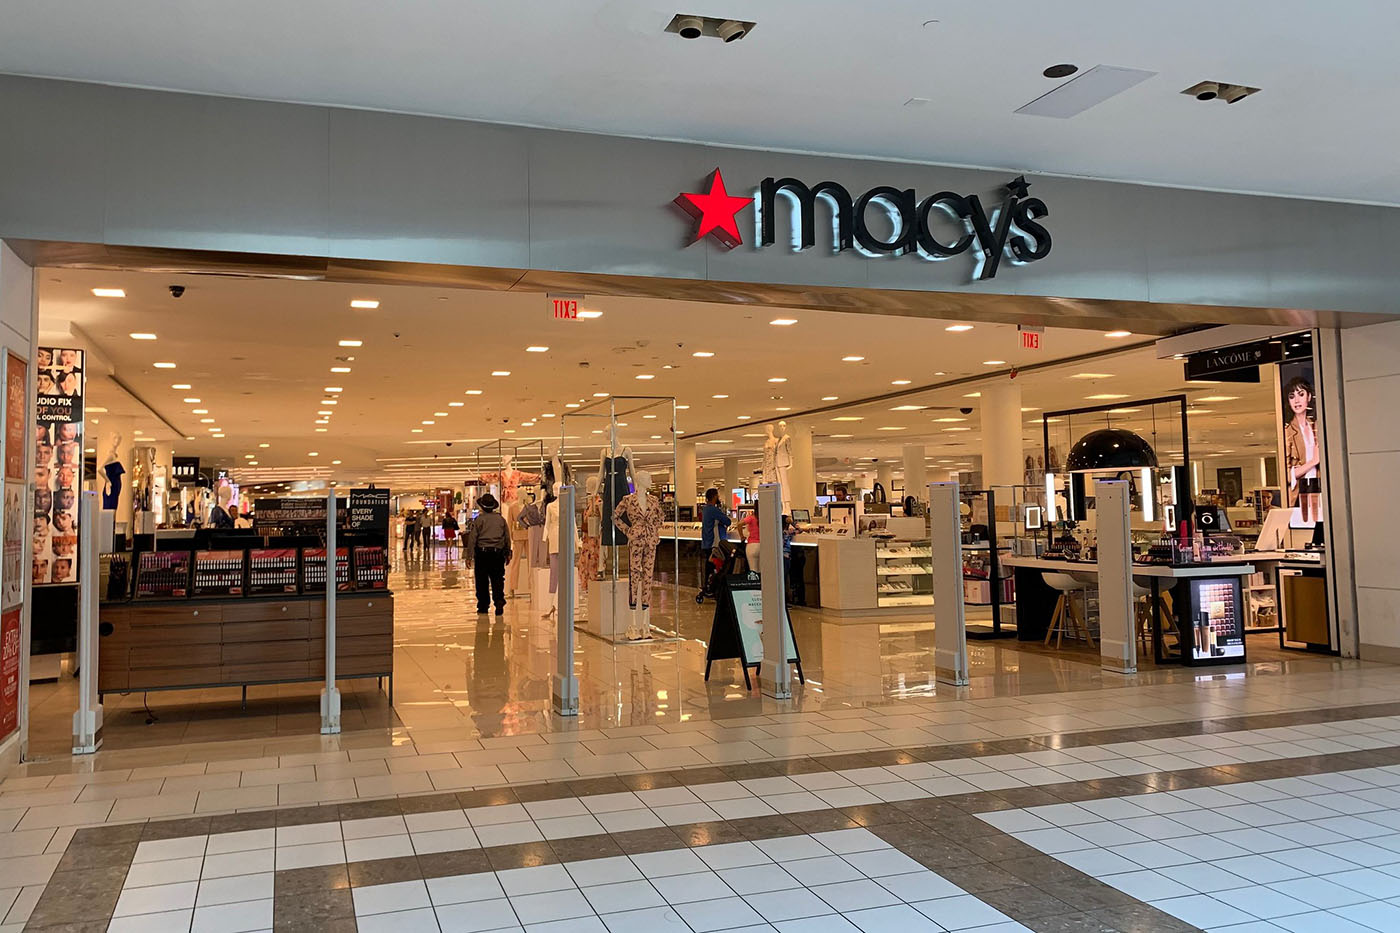 Macy's Flagship store at Dadeland Mall in Miami, FL